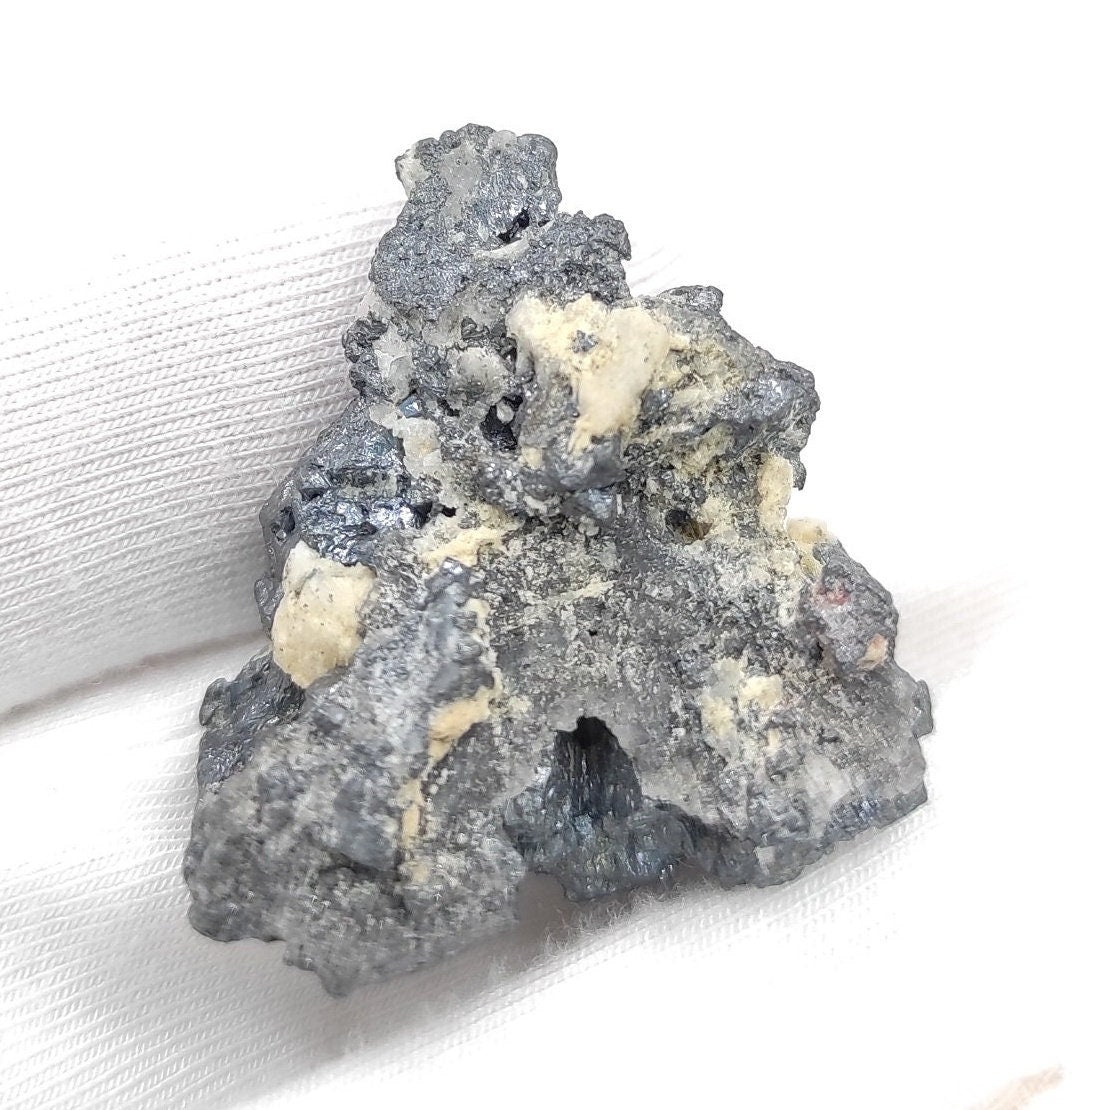 18g Acanthite Silver Ore Crystals - Bou Azzer, Morocco - Raw Silver Sulfide Minerals - Silver Minerals Specimen - Rough Silver Crystals